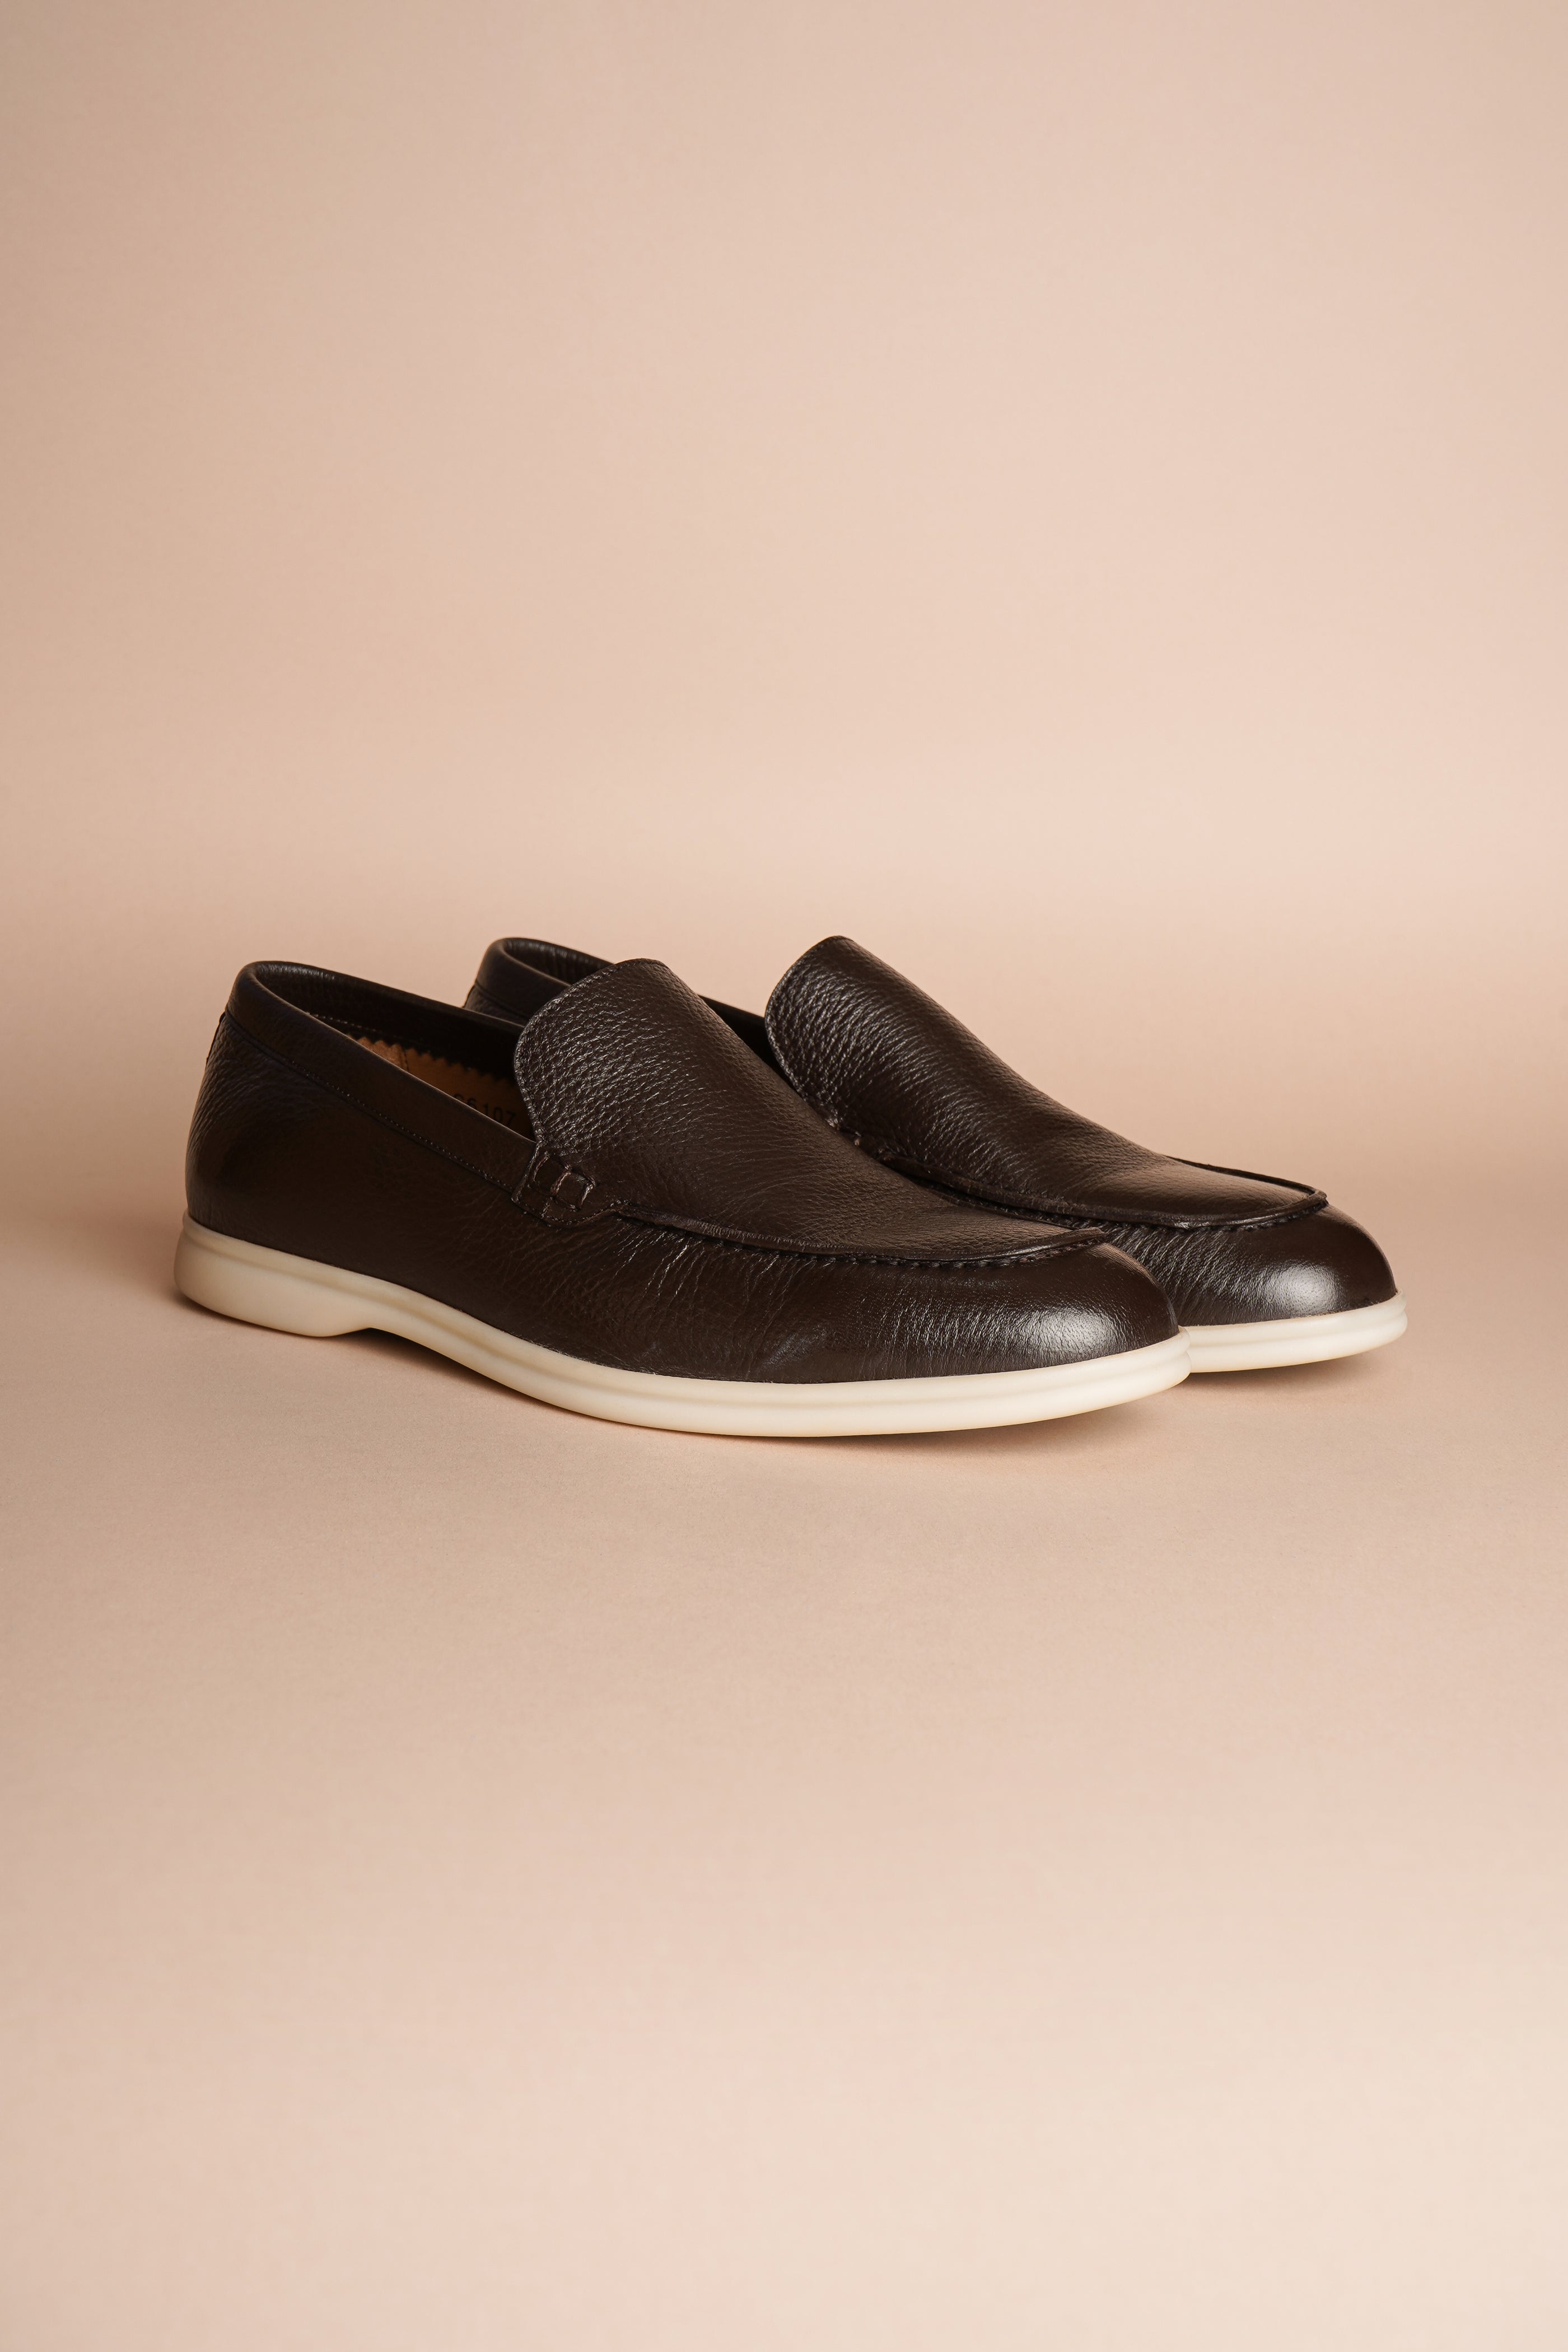 Beaumont Heritage Suede Loafers